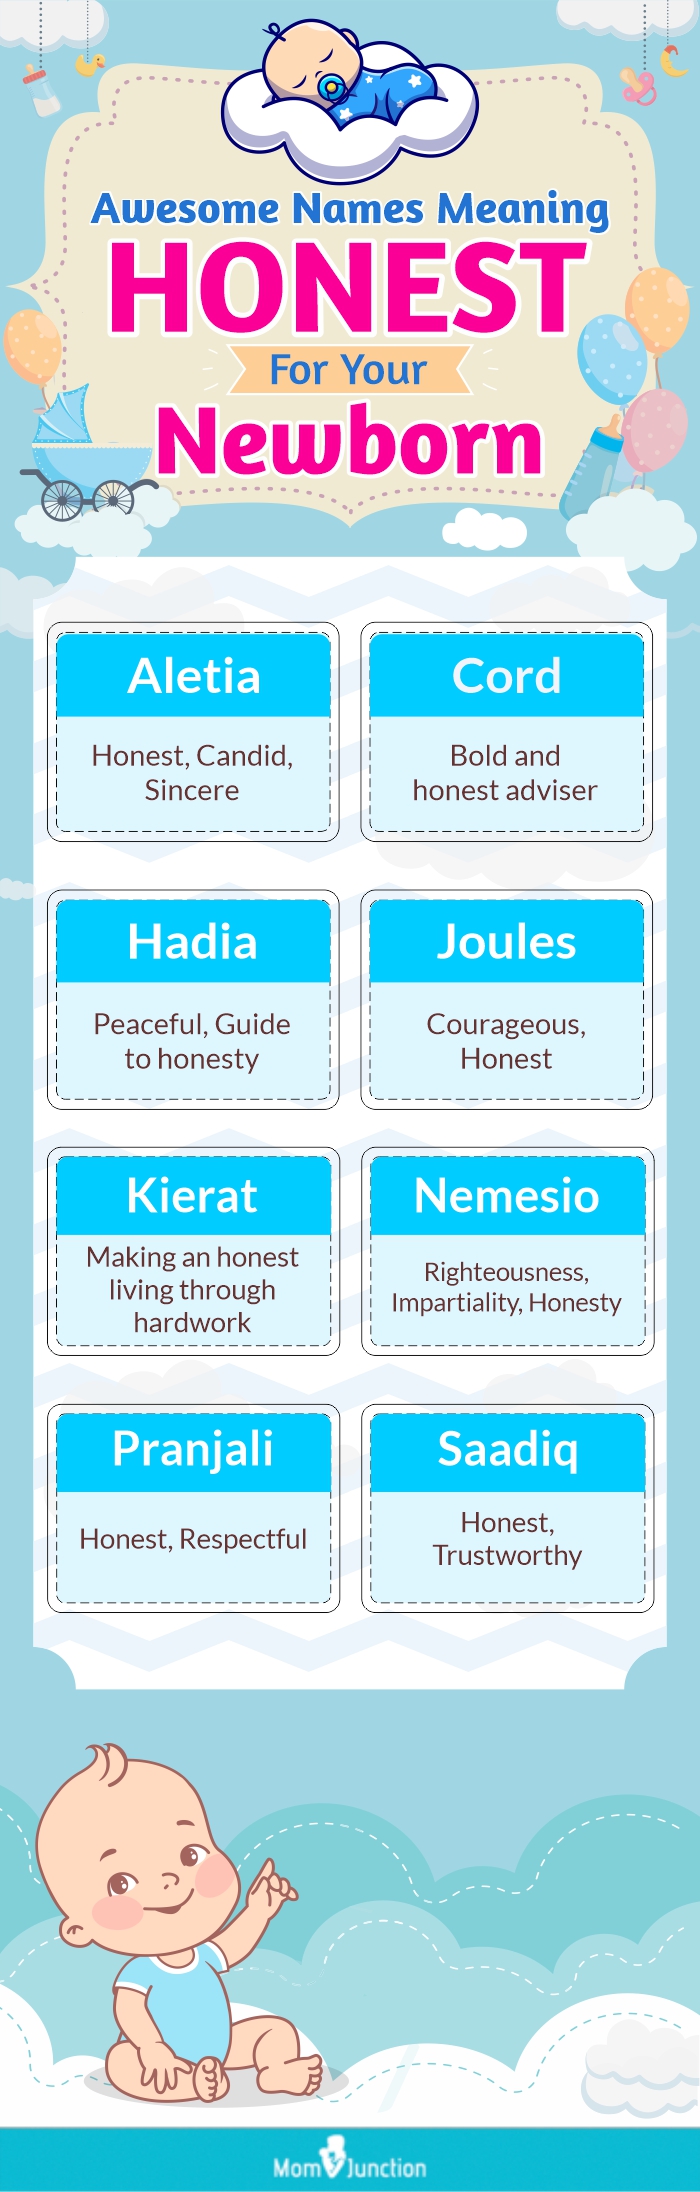 awesome names meaning honest for your newborn (infographic)